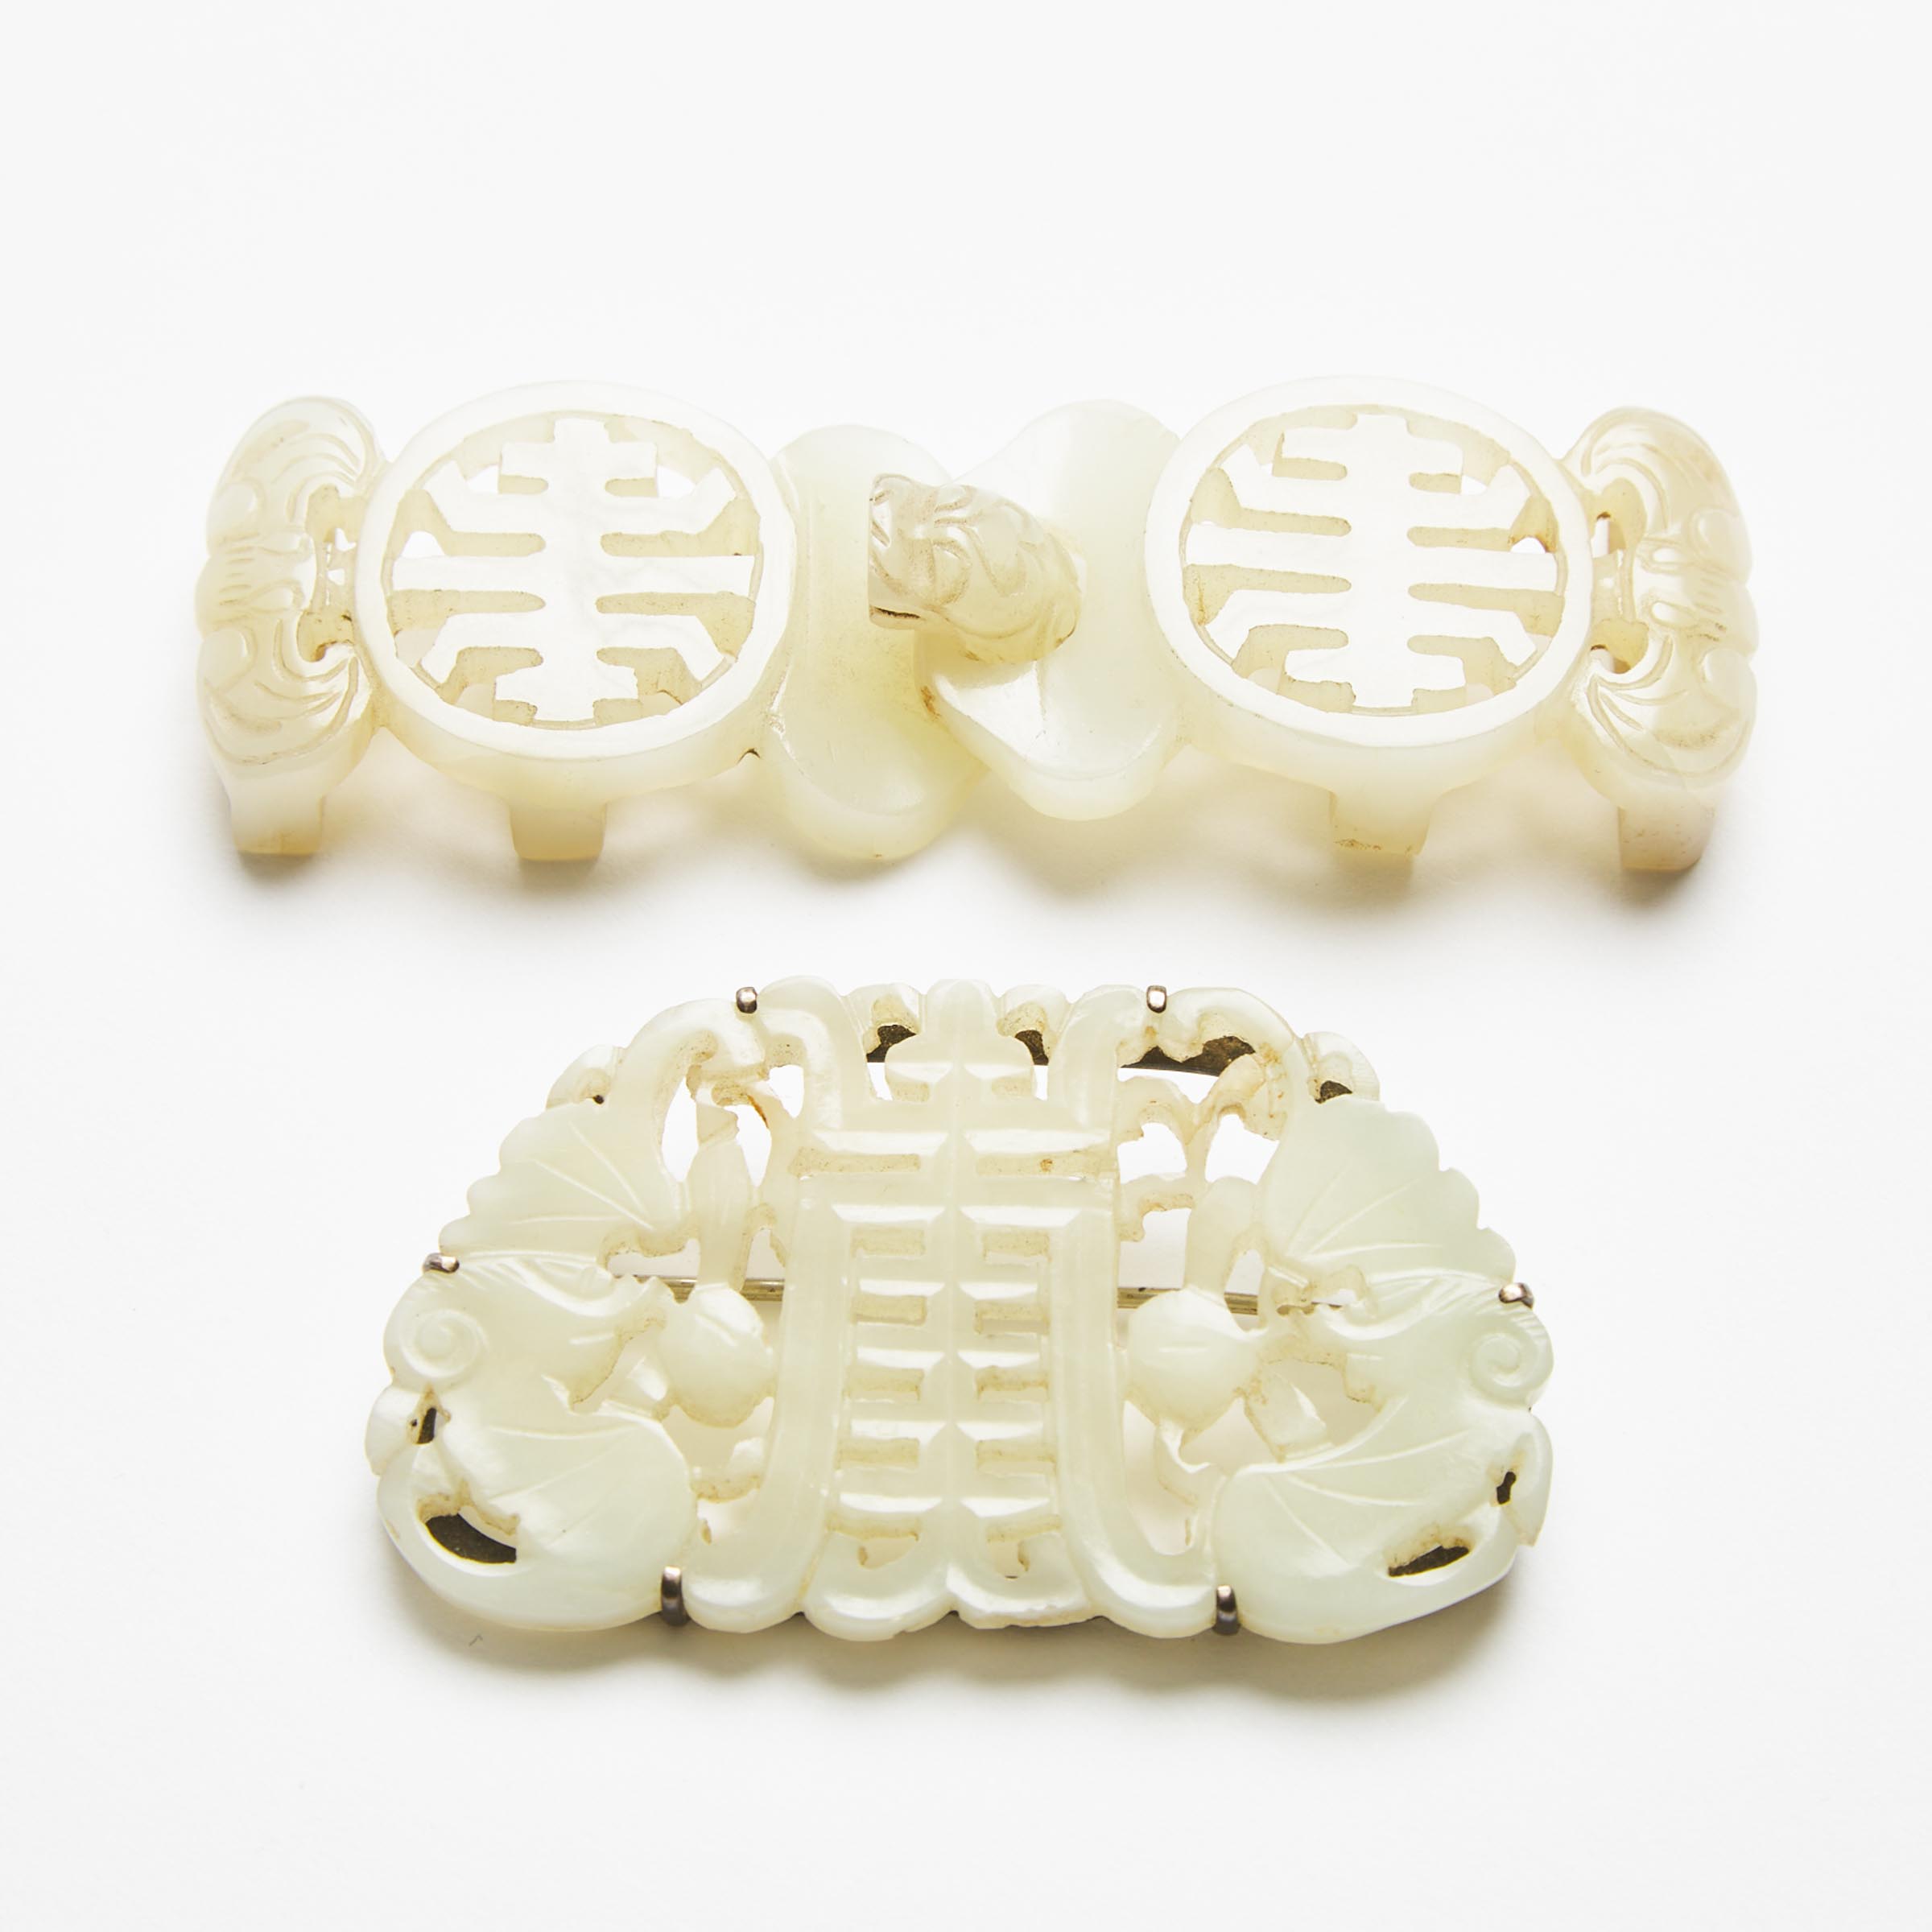 A White Jade 'Longevity' Two-Part Belt Buckle, Together With a White Jade 'Butterfly' Brooch, 19th Century